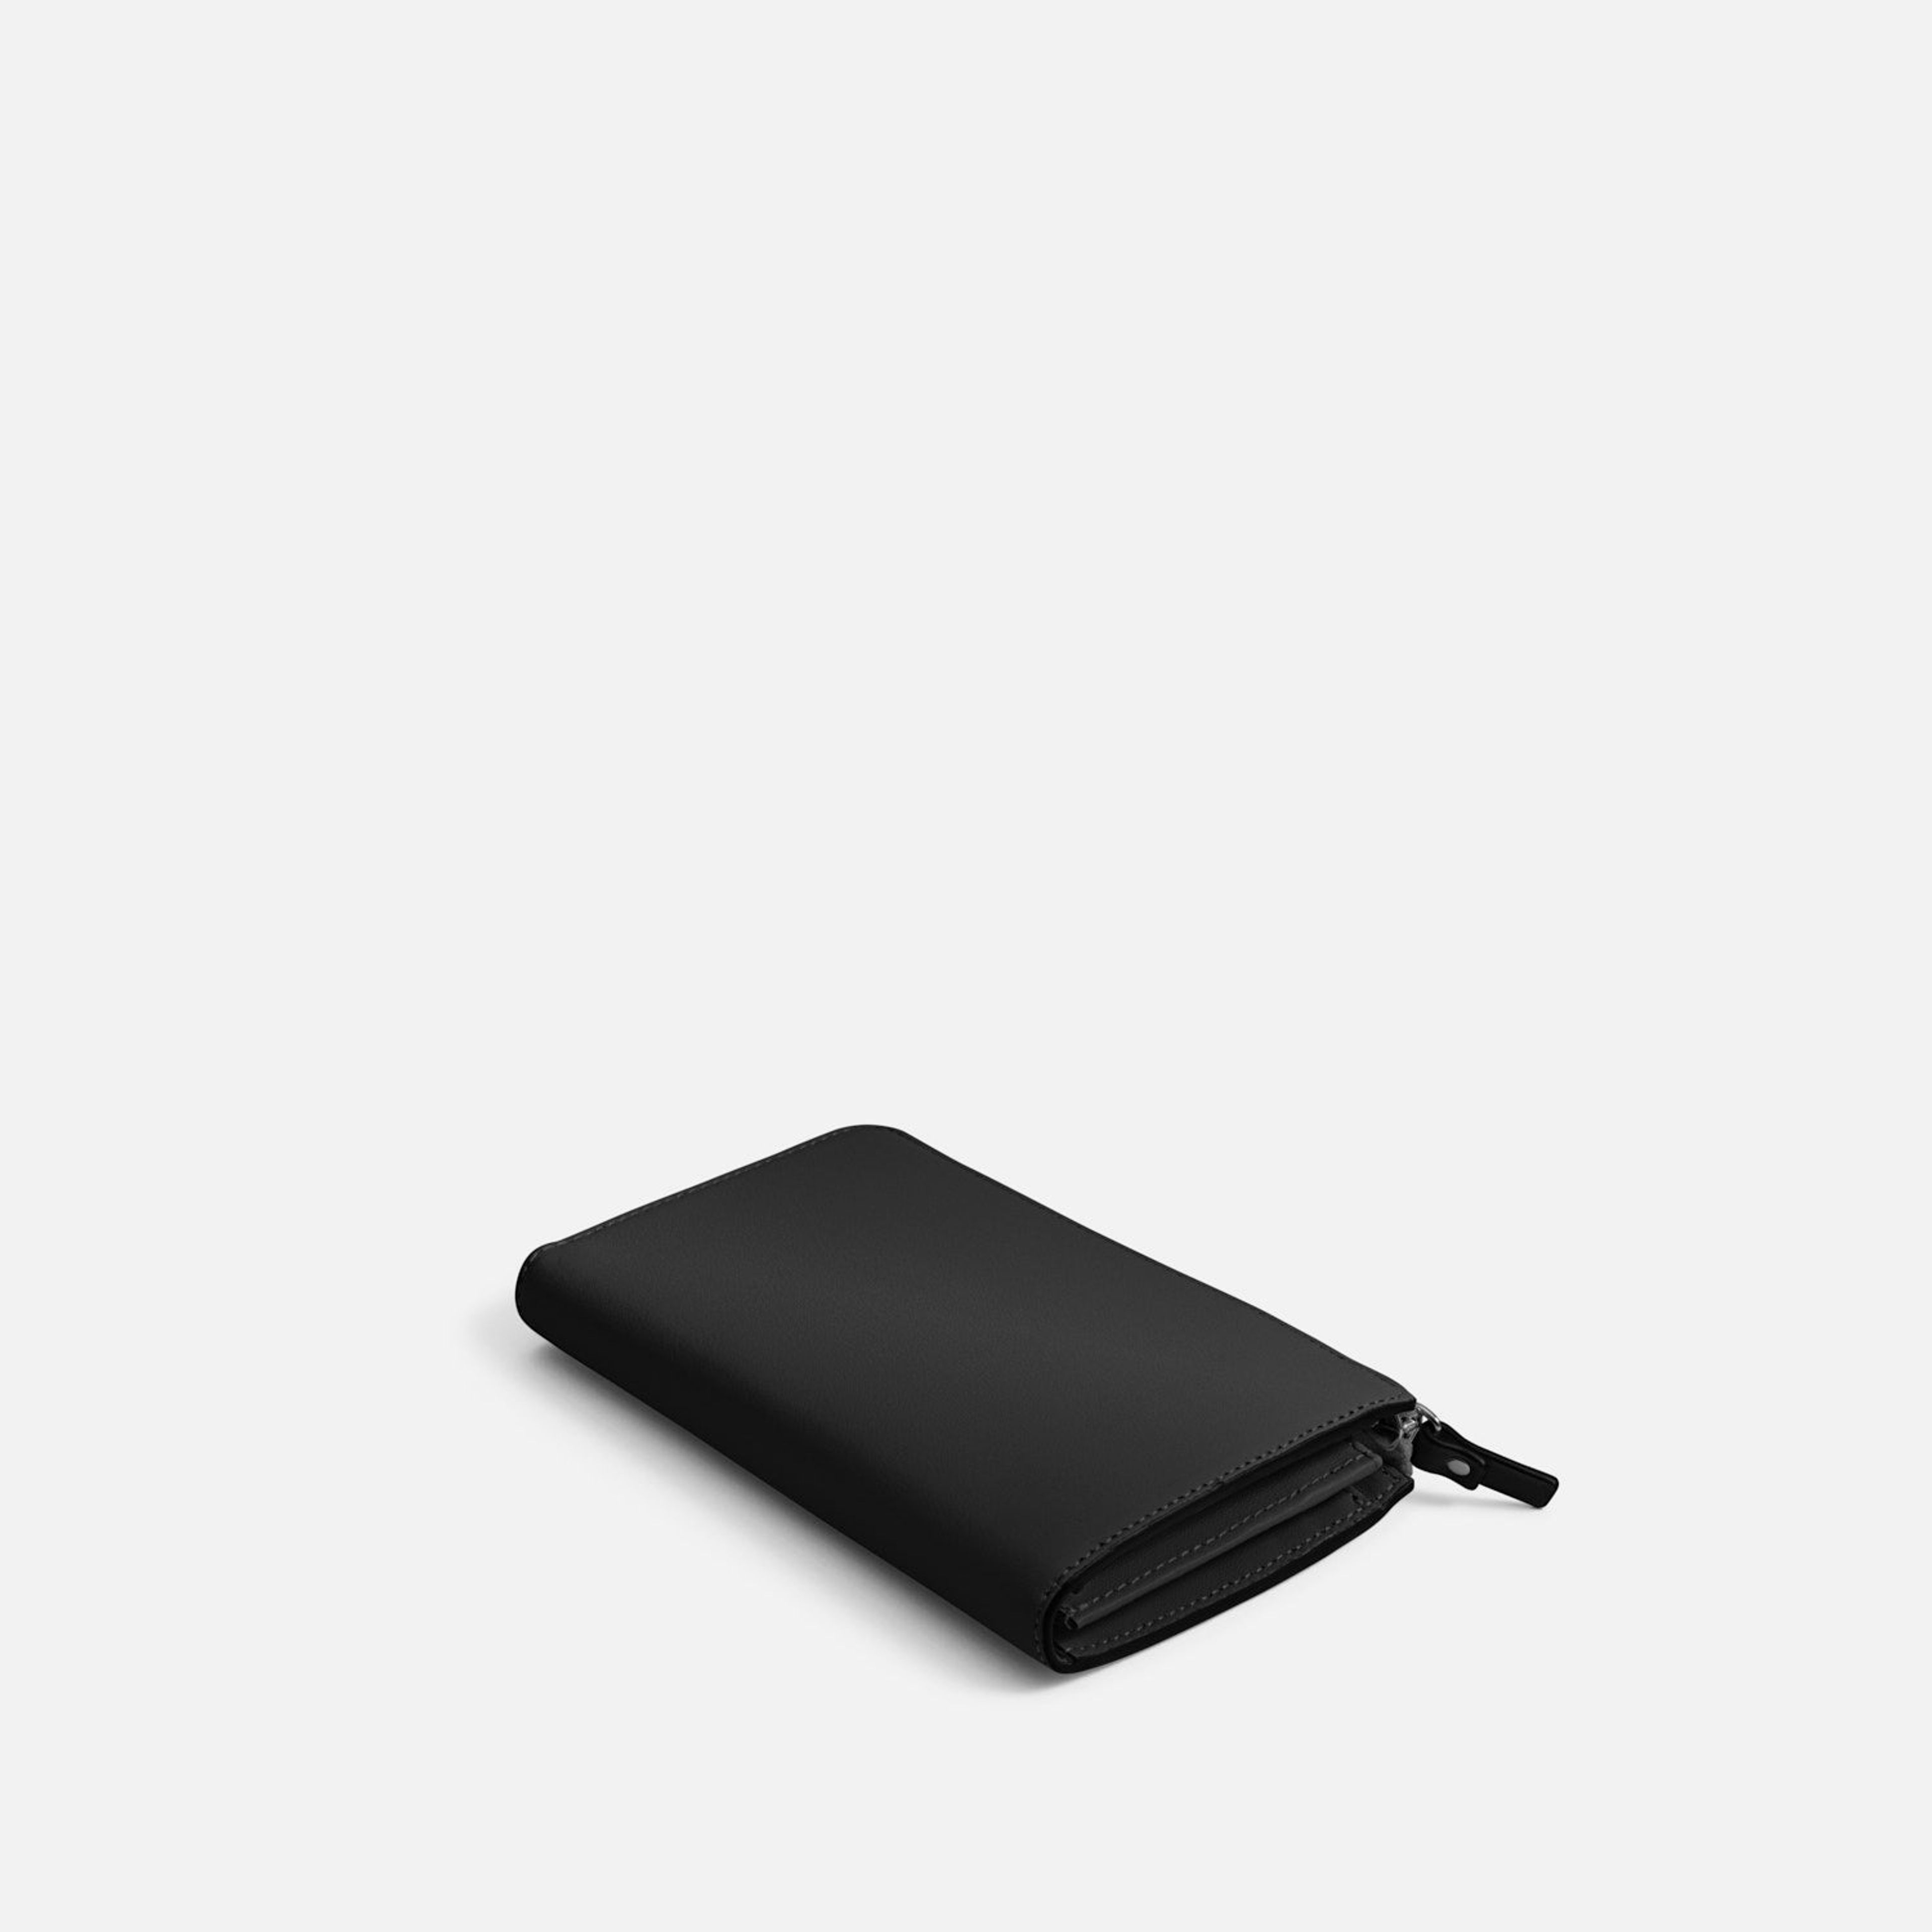 Magnolia Leather Wallet - Nappa Leather - Black / Silver / Grey